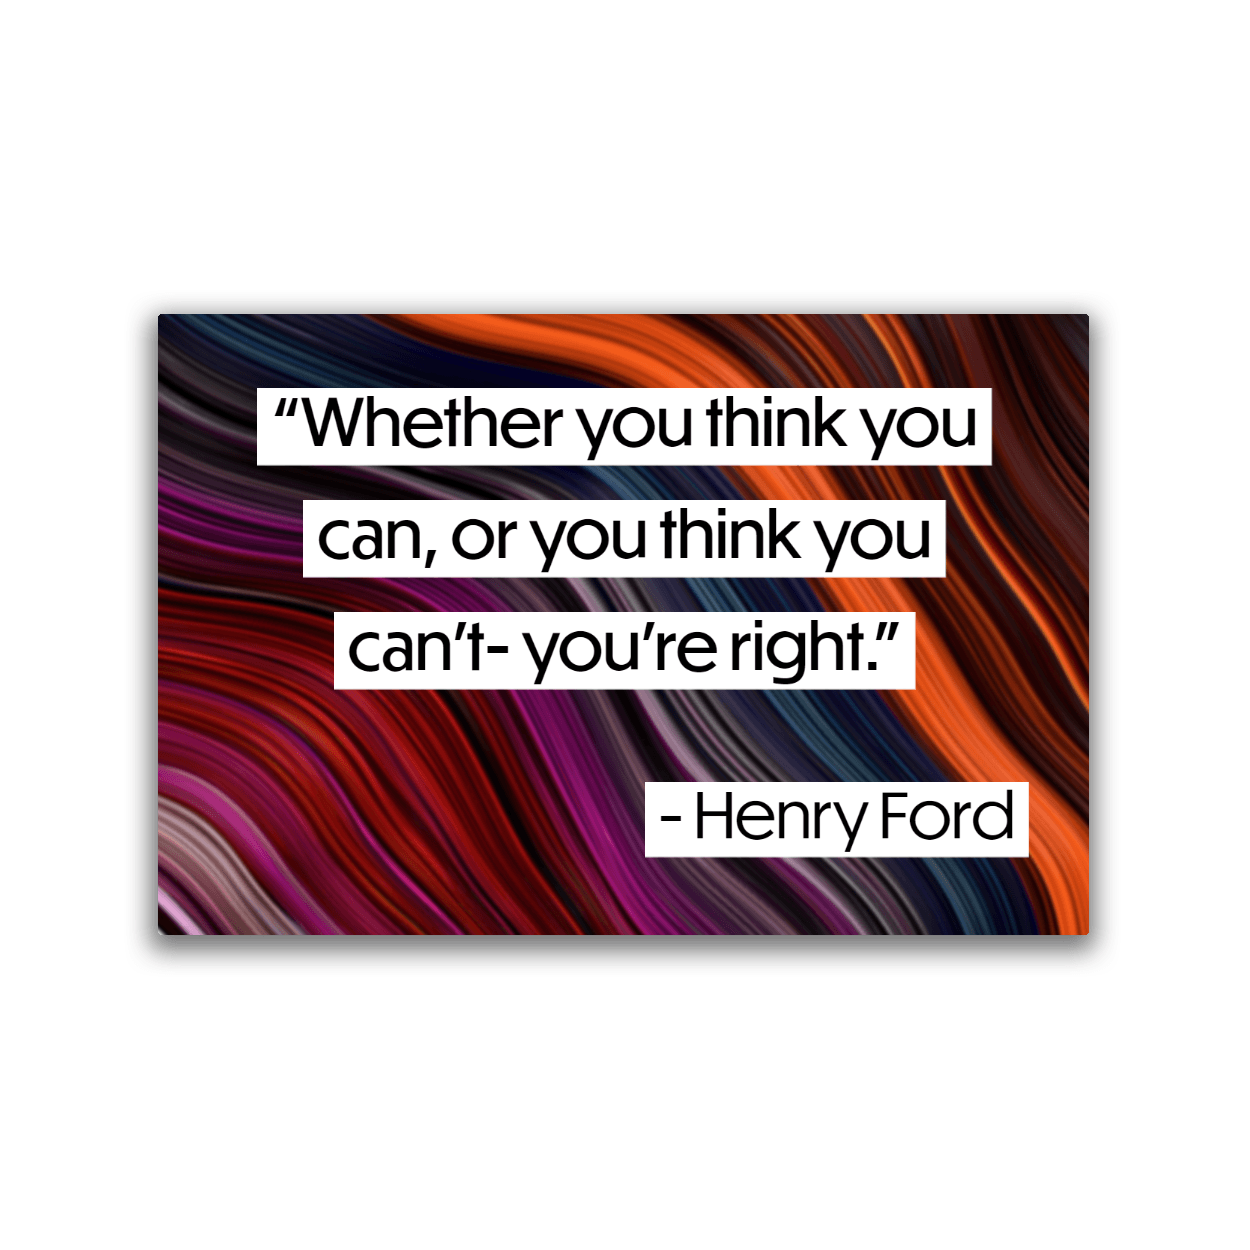 Image of a 2x3 magnet with a Henry Ford quote